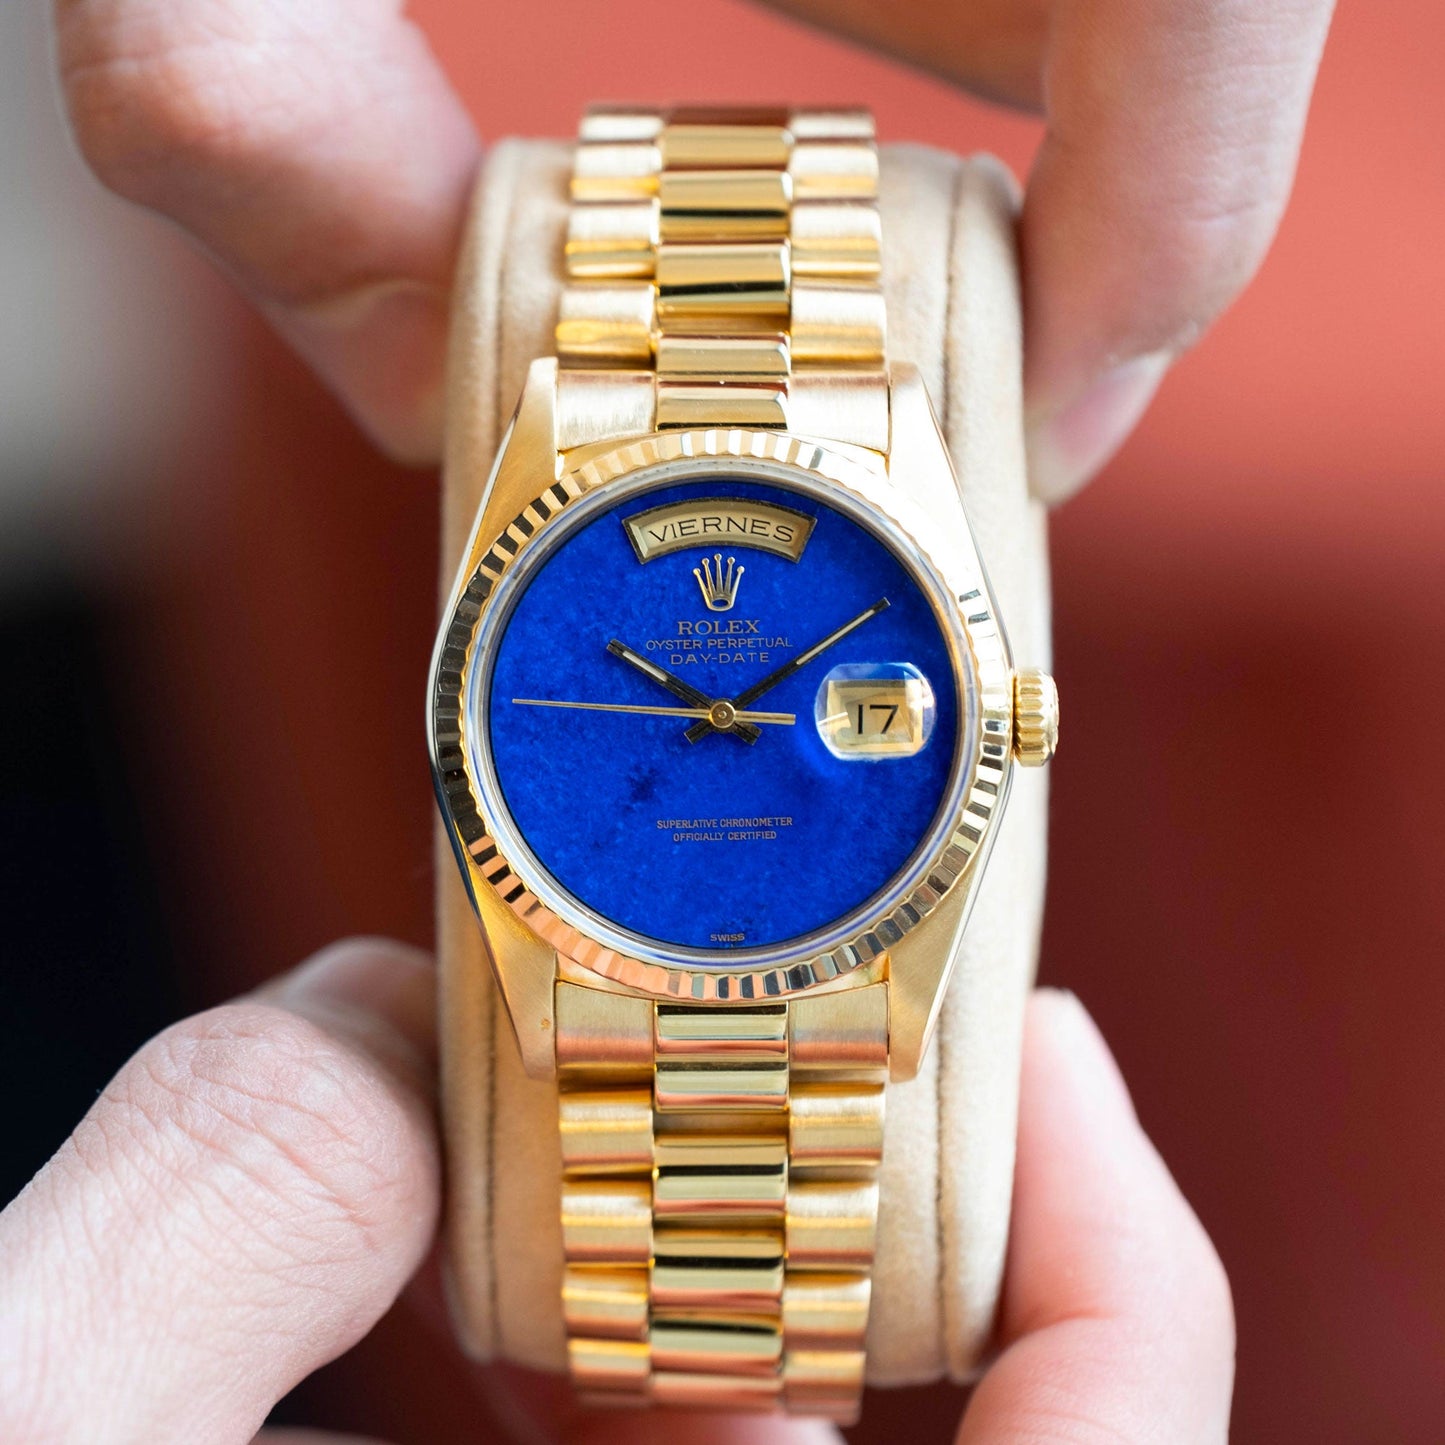 Rolex Day-Date 18238 Double Quick-Set Lapis Lazuli from 1999